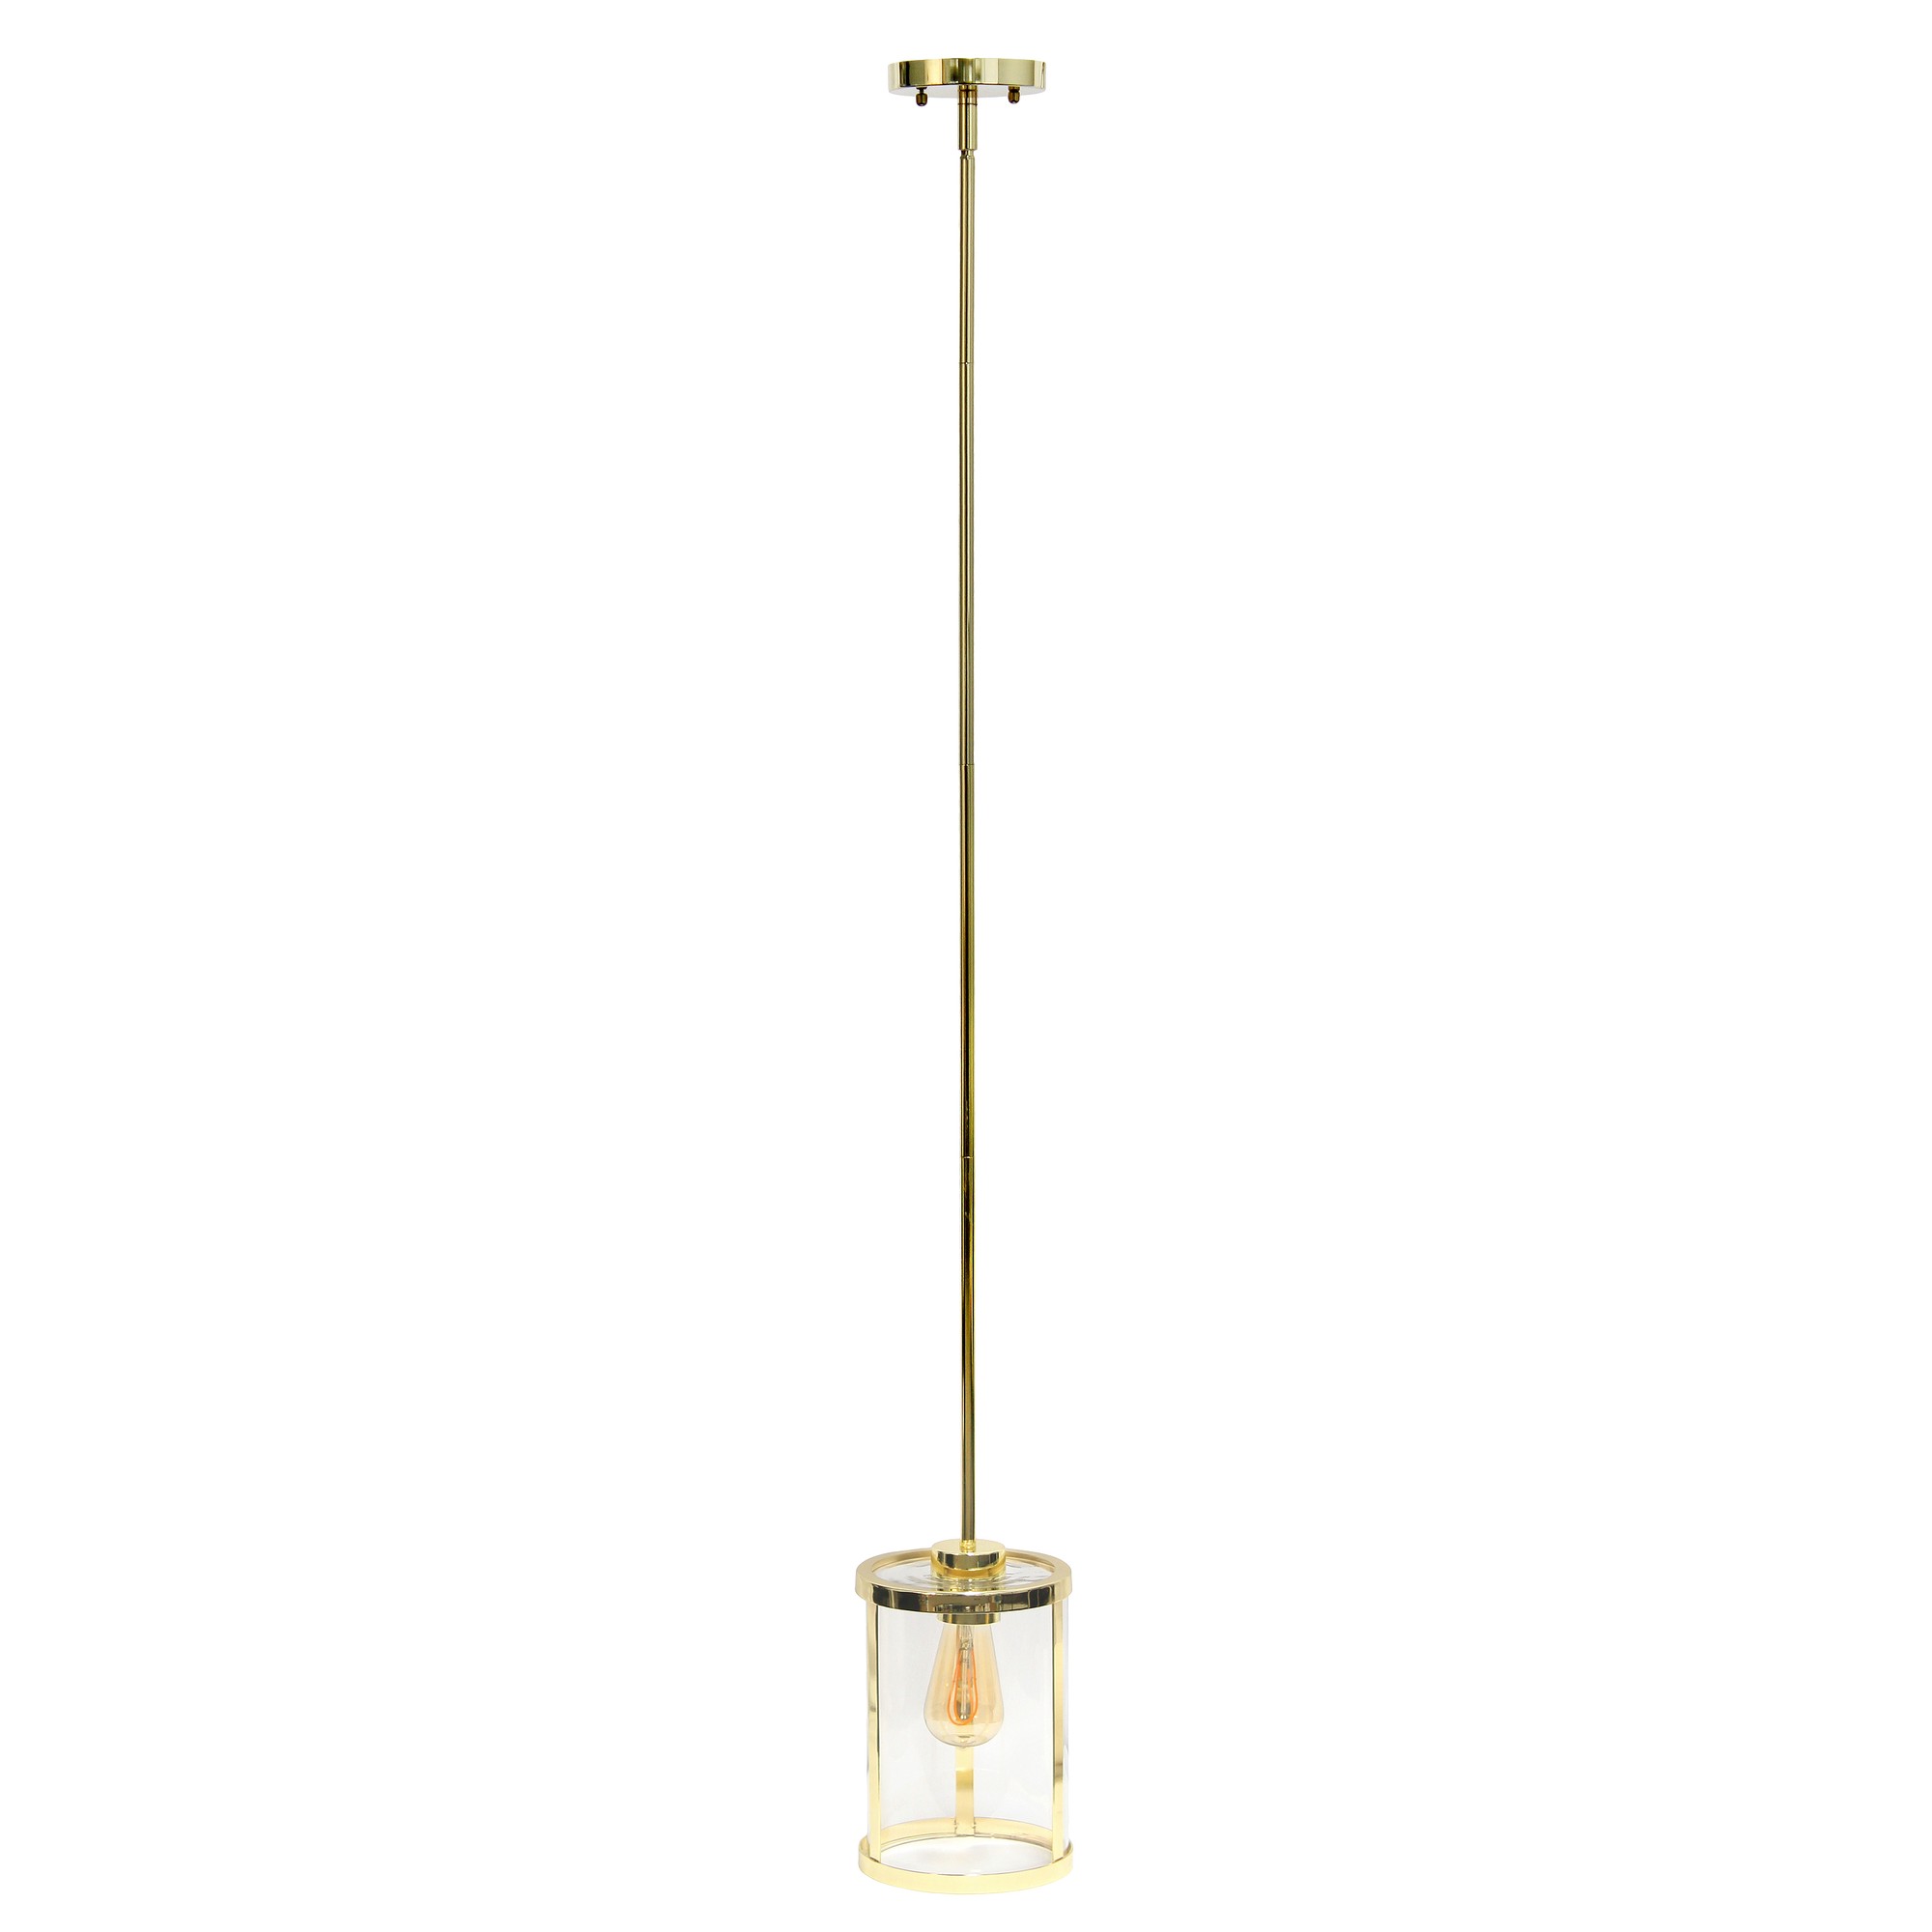 Lalia Home 1-Light 9.25" Modern Adjustable Hanging Cylindrical Clear Glass Pendant Fixture with Metal Accents, Gold